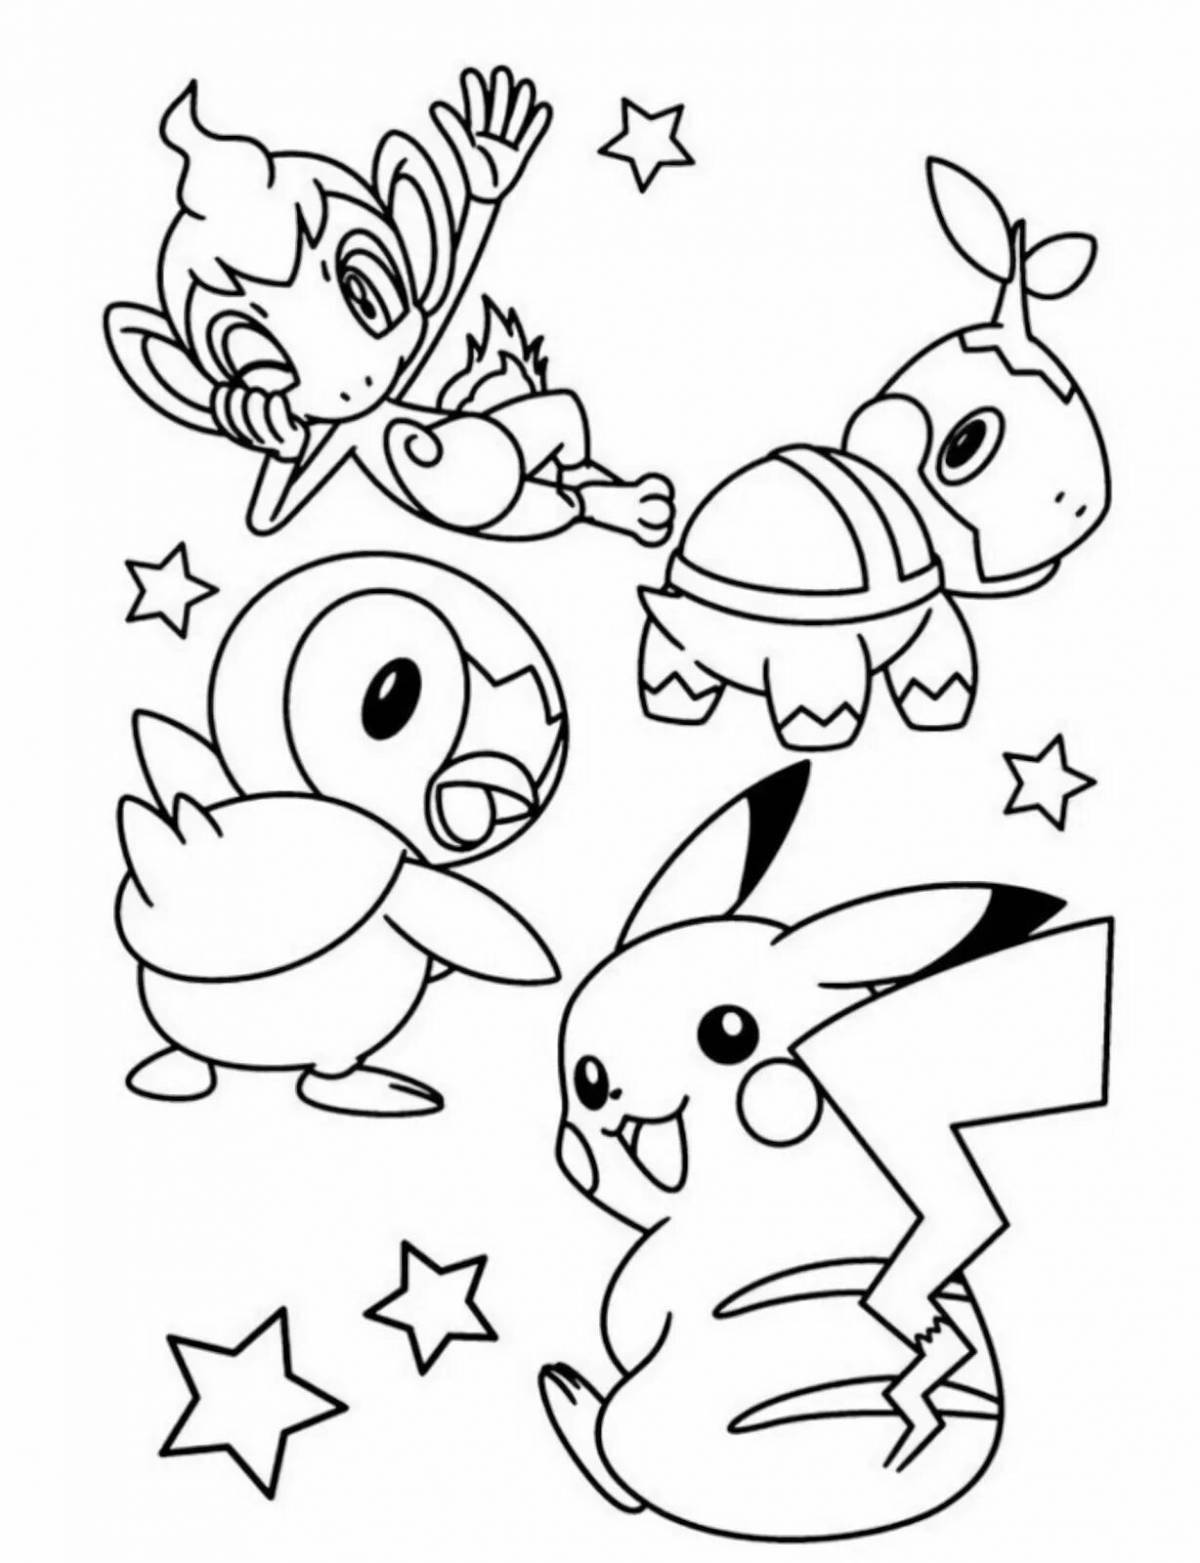 Charming chimchar coloring page